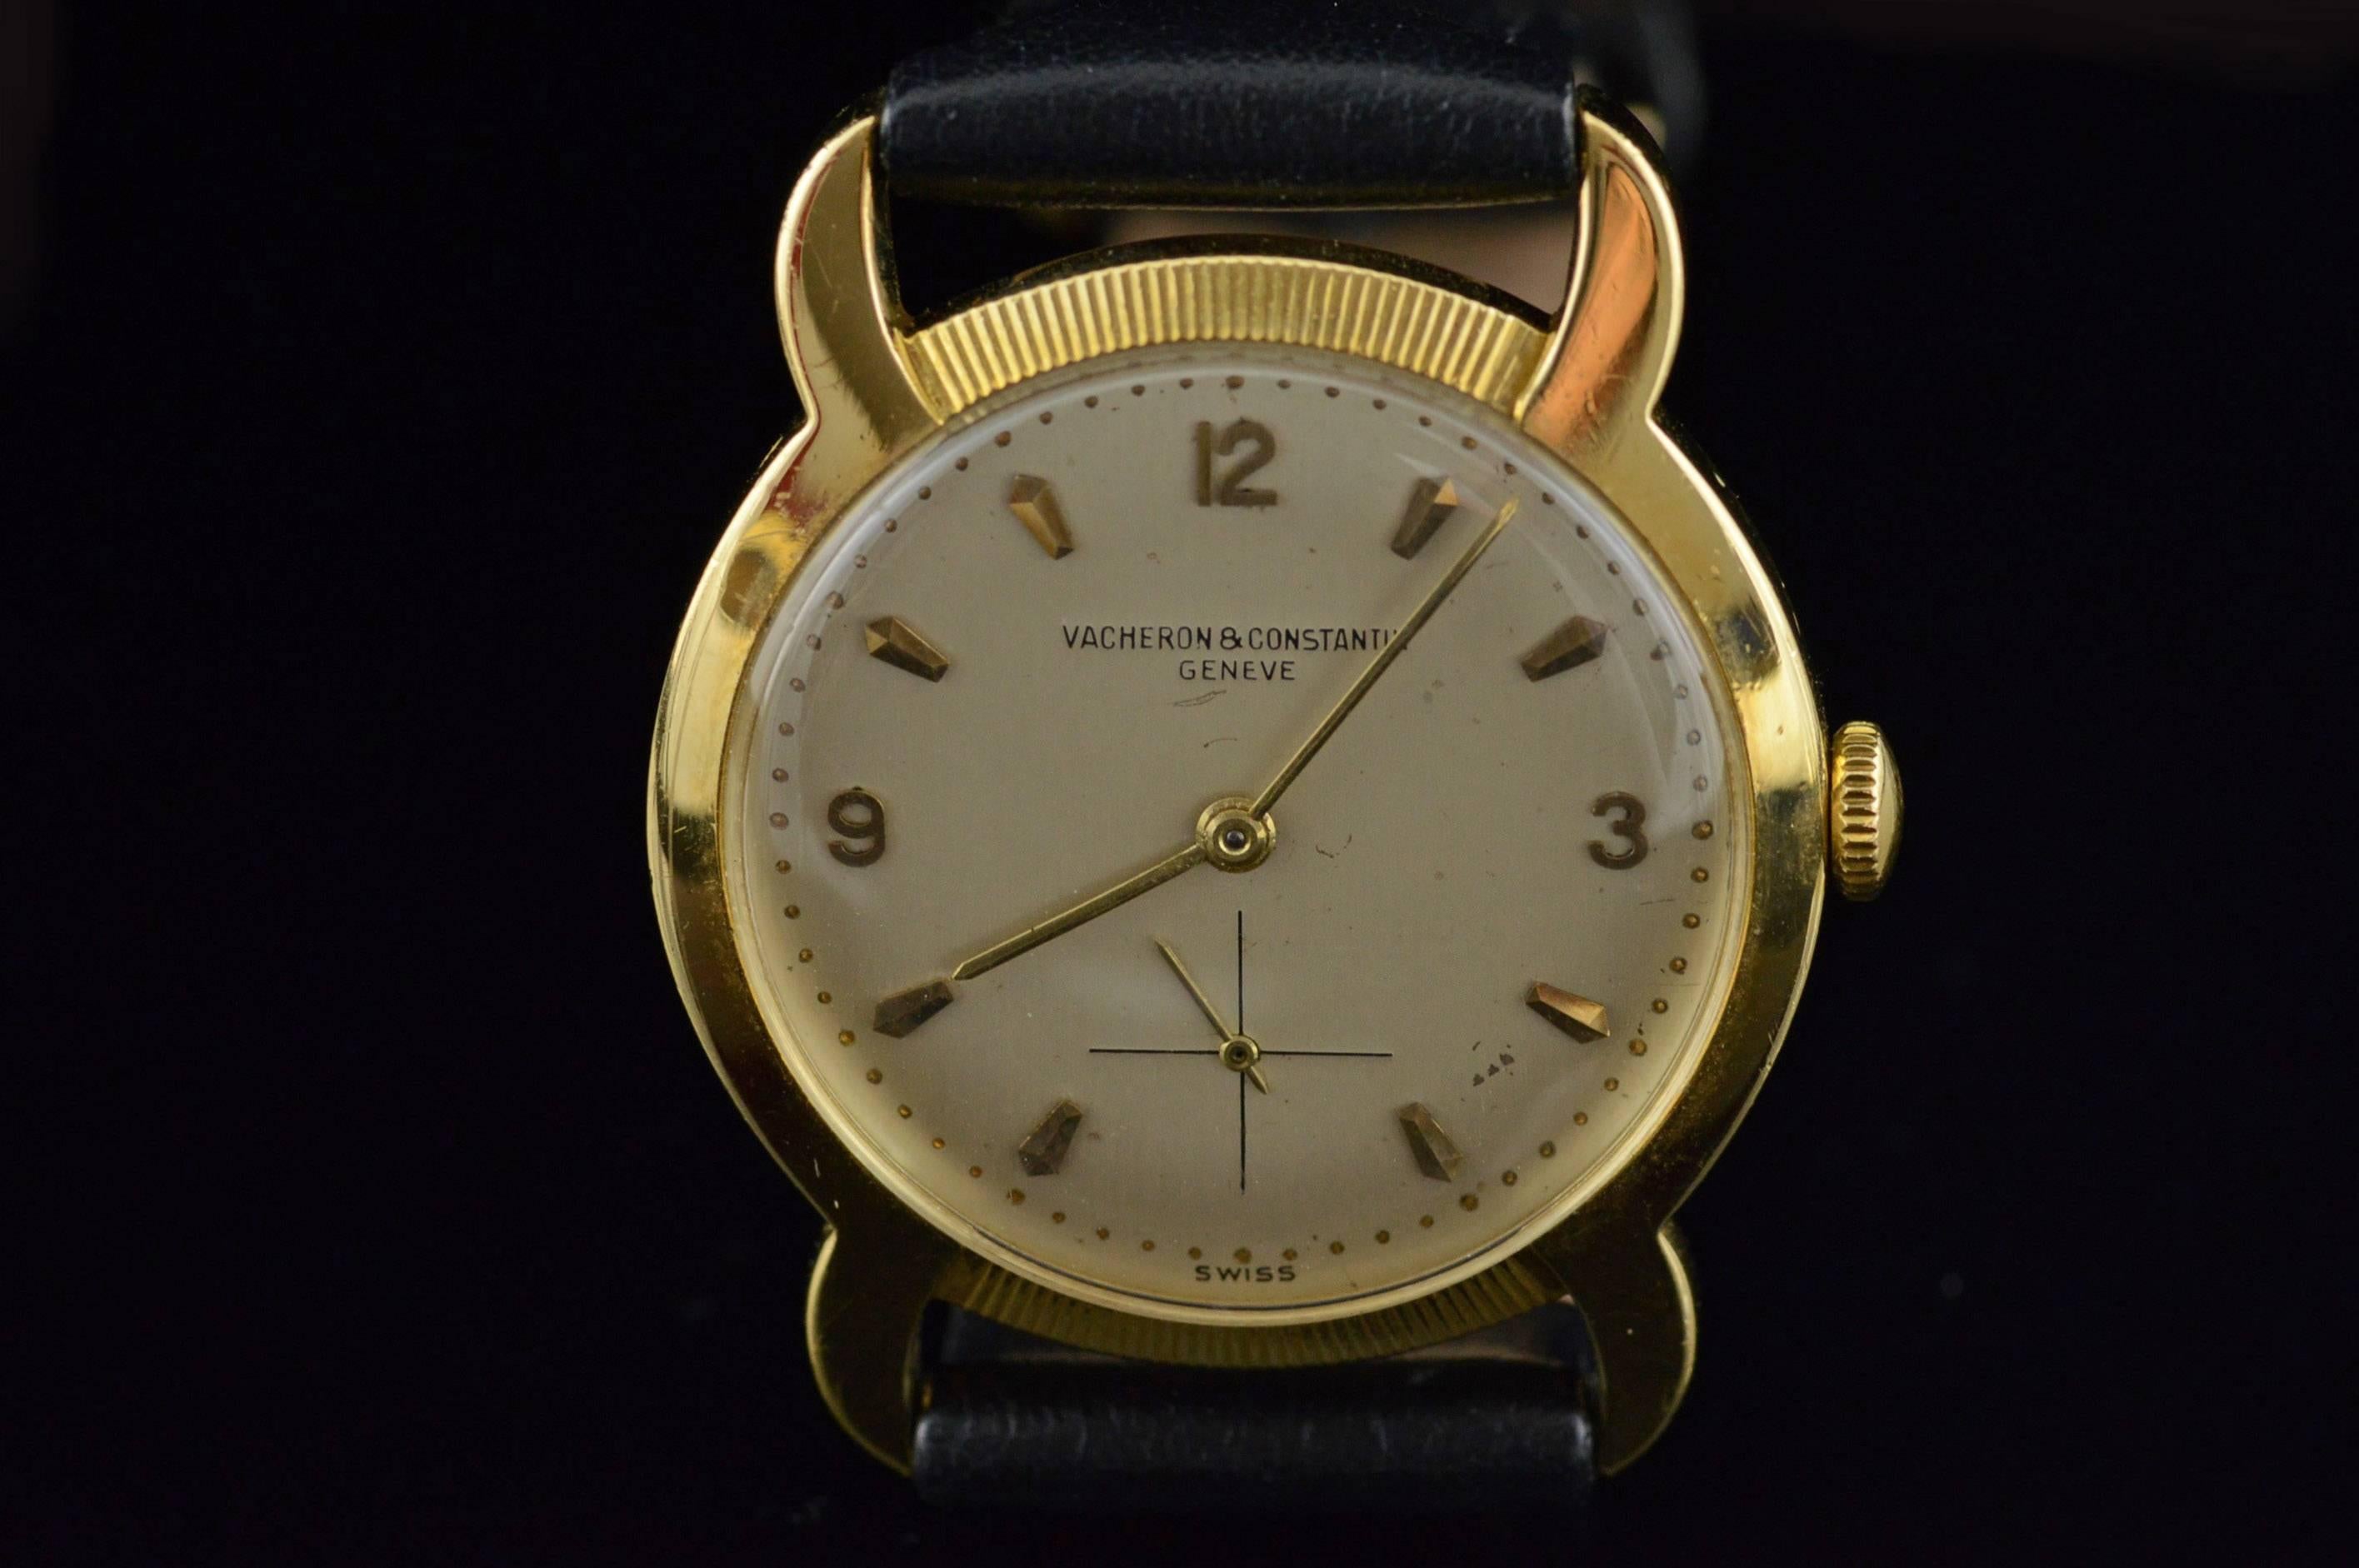 ·Item: Vacheron Constantin Men's 18K Gold Watch 

·Composition: 18k Gold Marked

·Notes: Watch has been recently cleaned and serviced. The watch runs and sets.

·Weight: 34g
